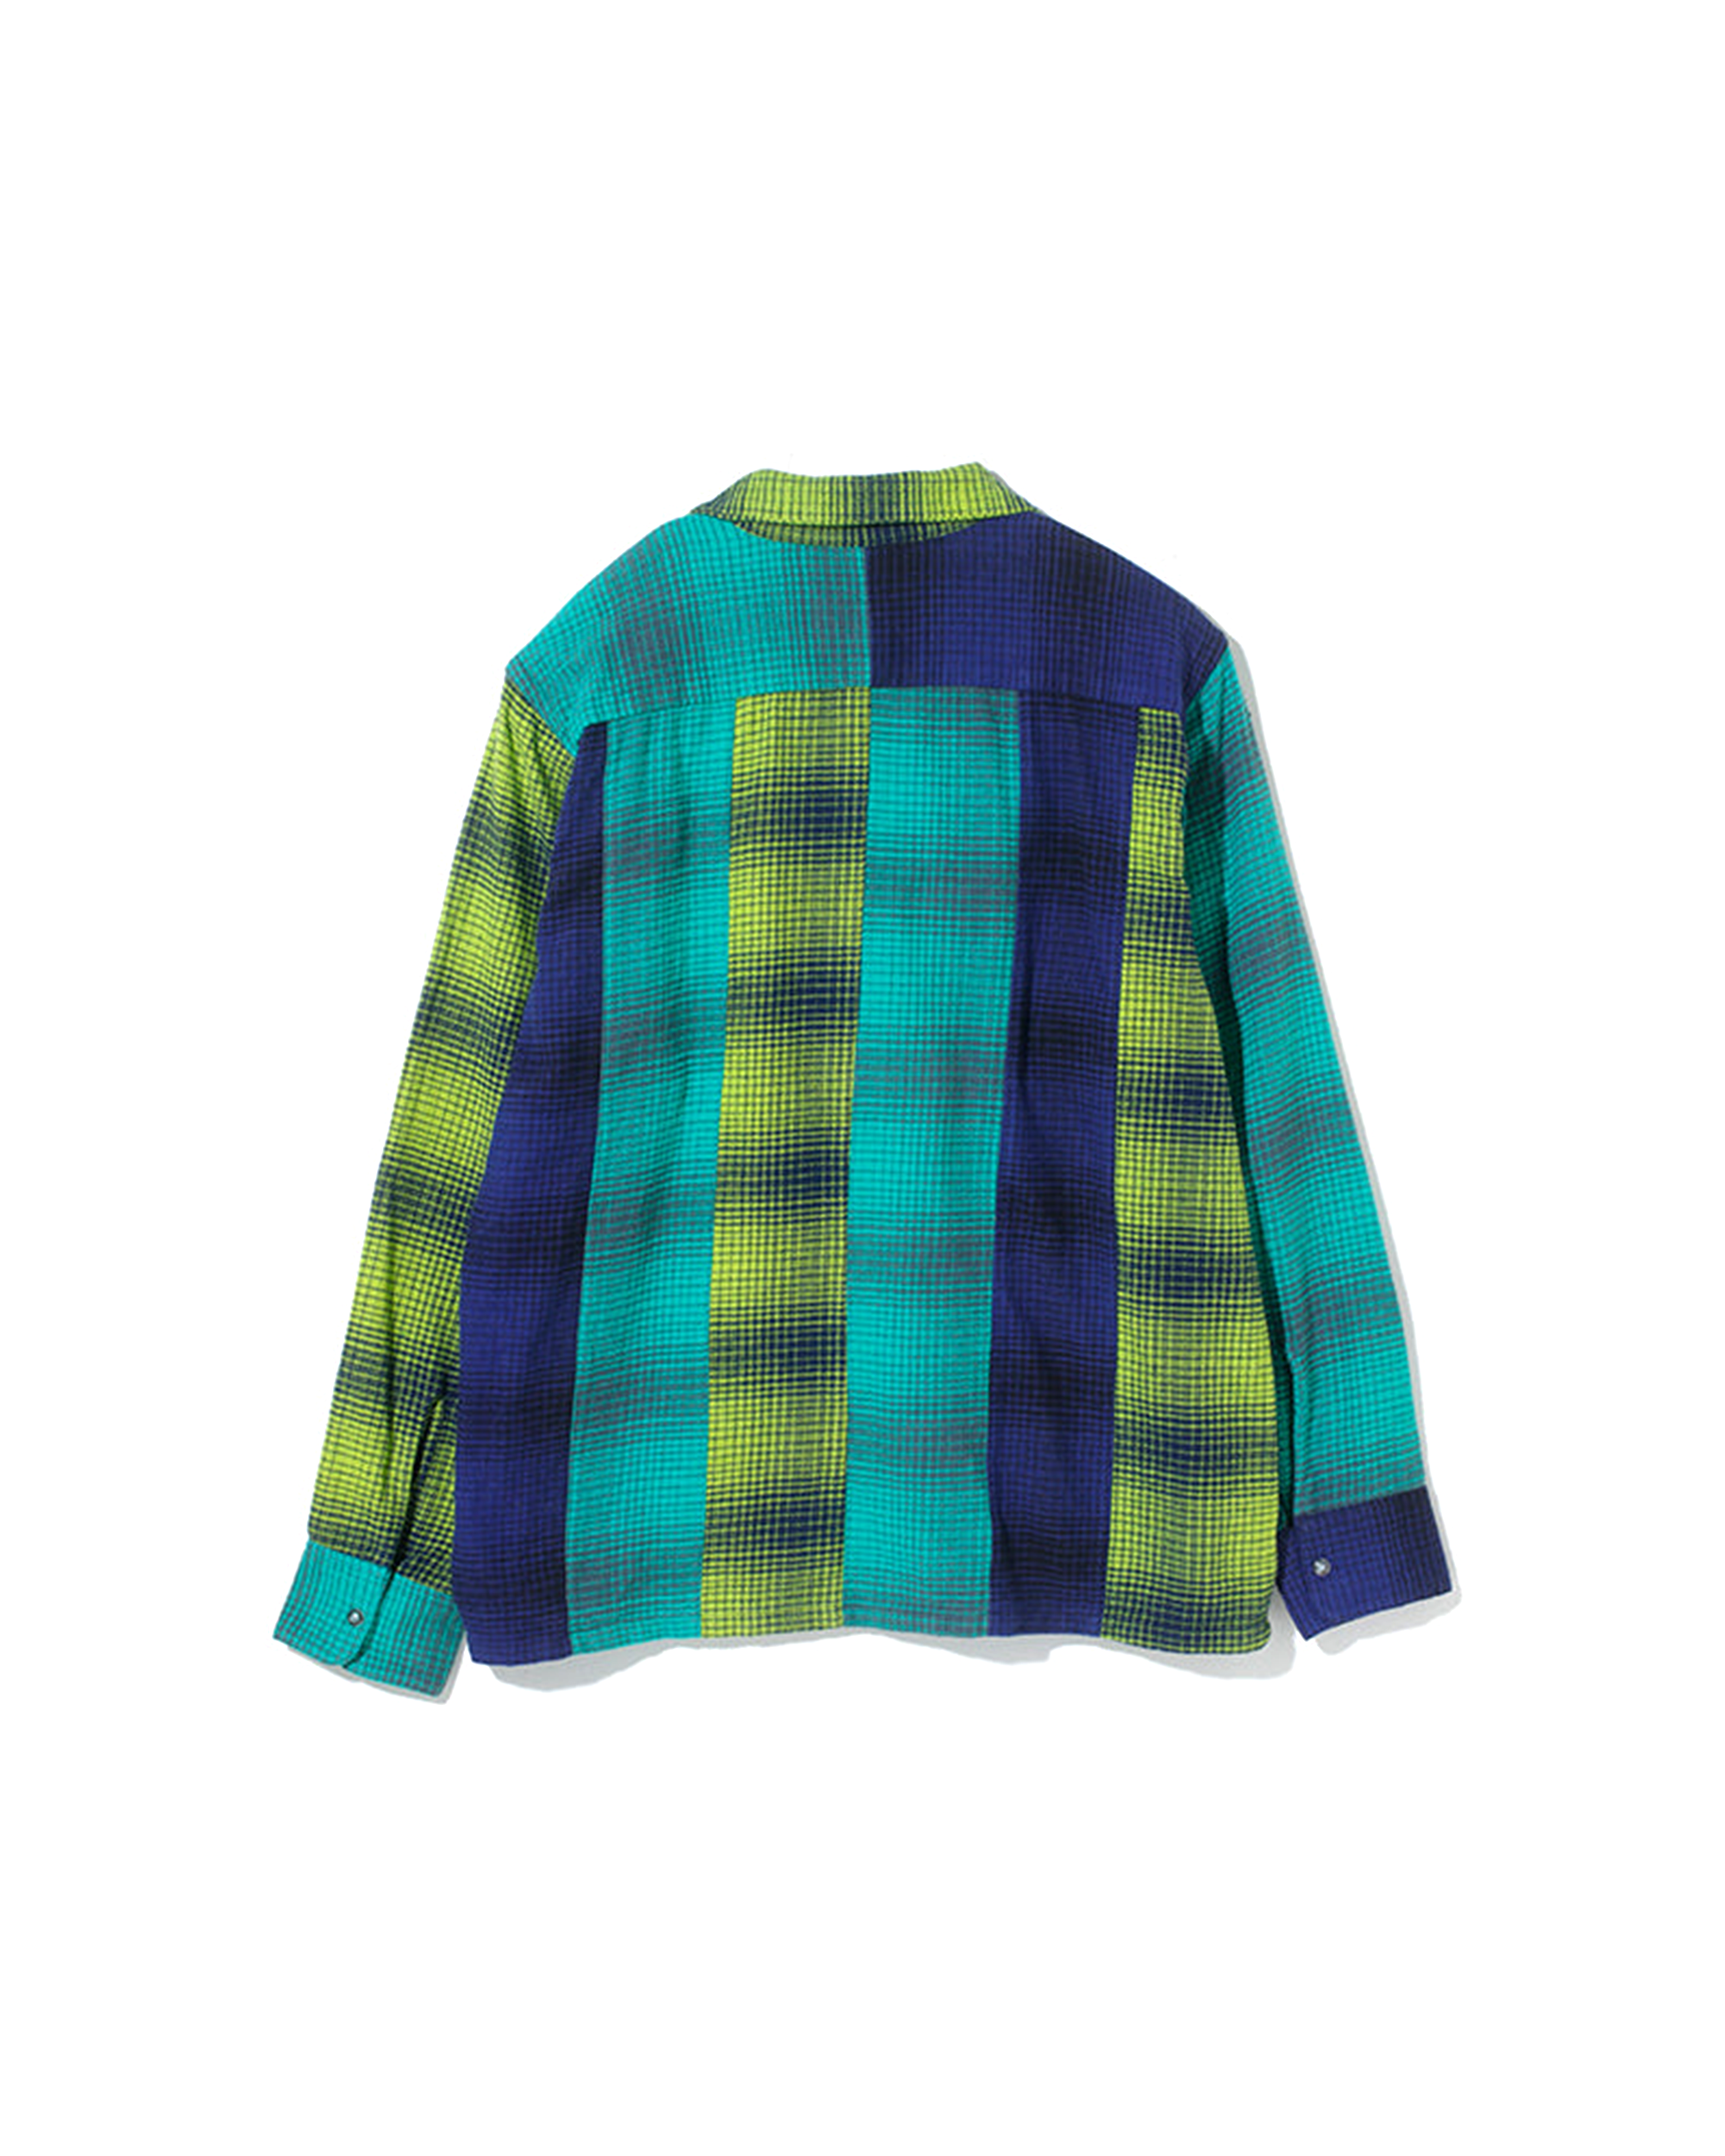 Ombre Plaid Patchwork Shirt - Lime / Navy / Emerald